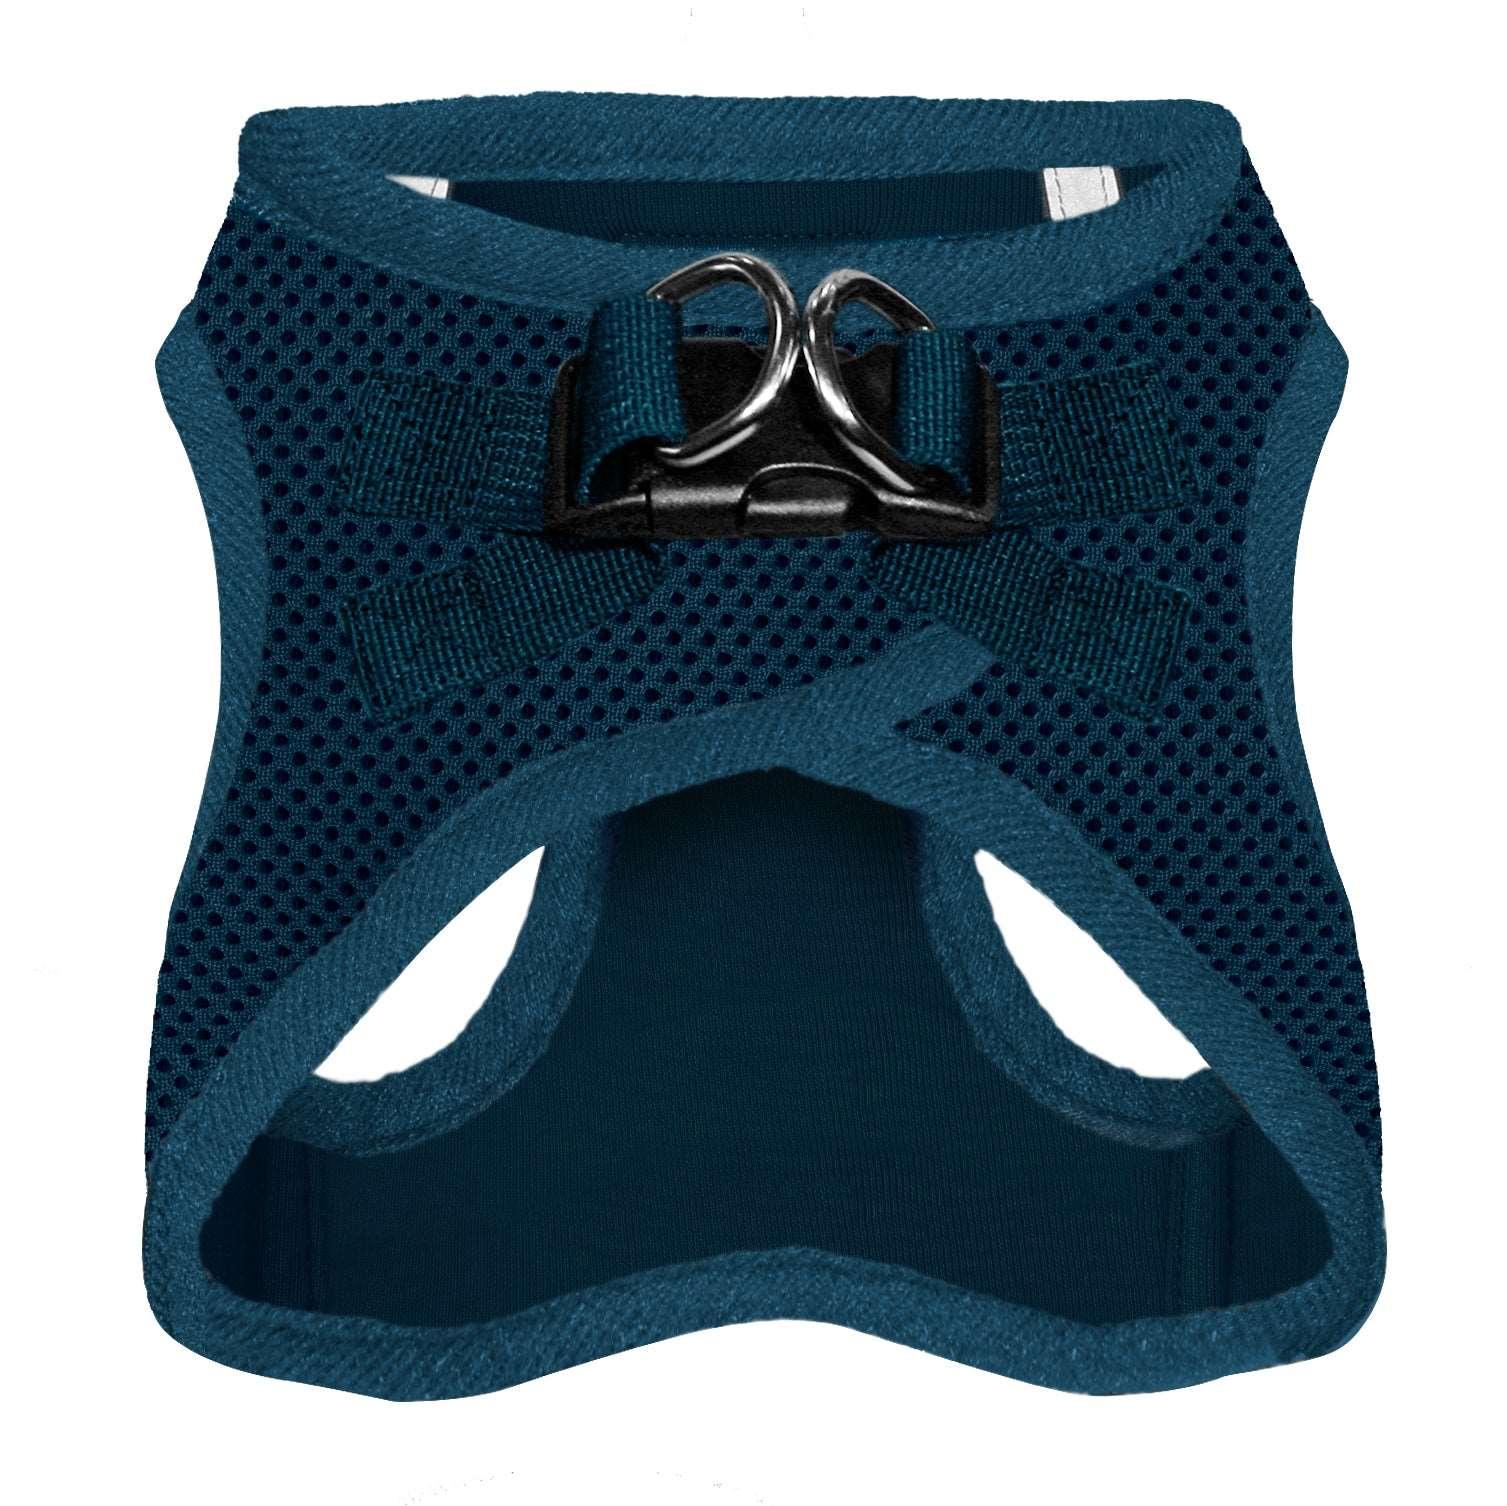 VOYAGER Step-In Air Pet Harness in Navy Blue with Matching Trim and Webbing - Black